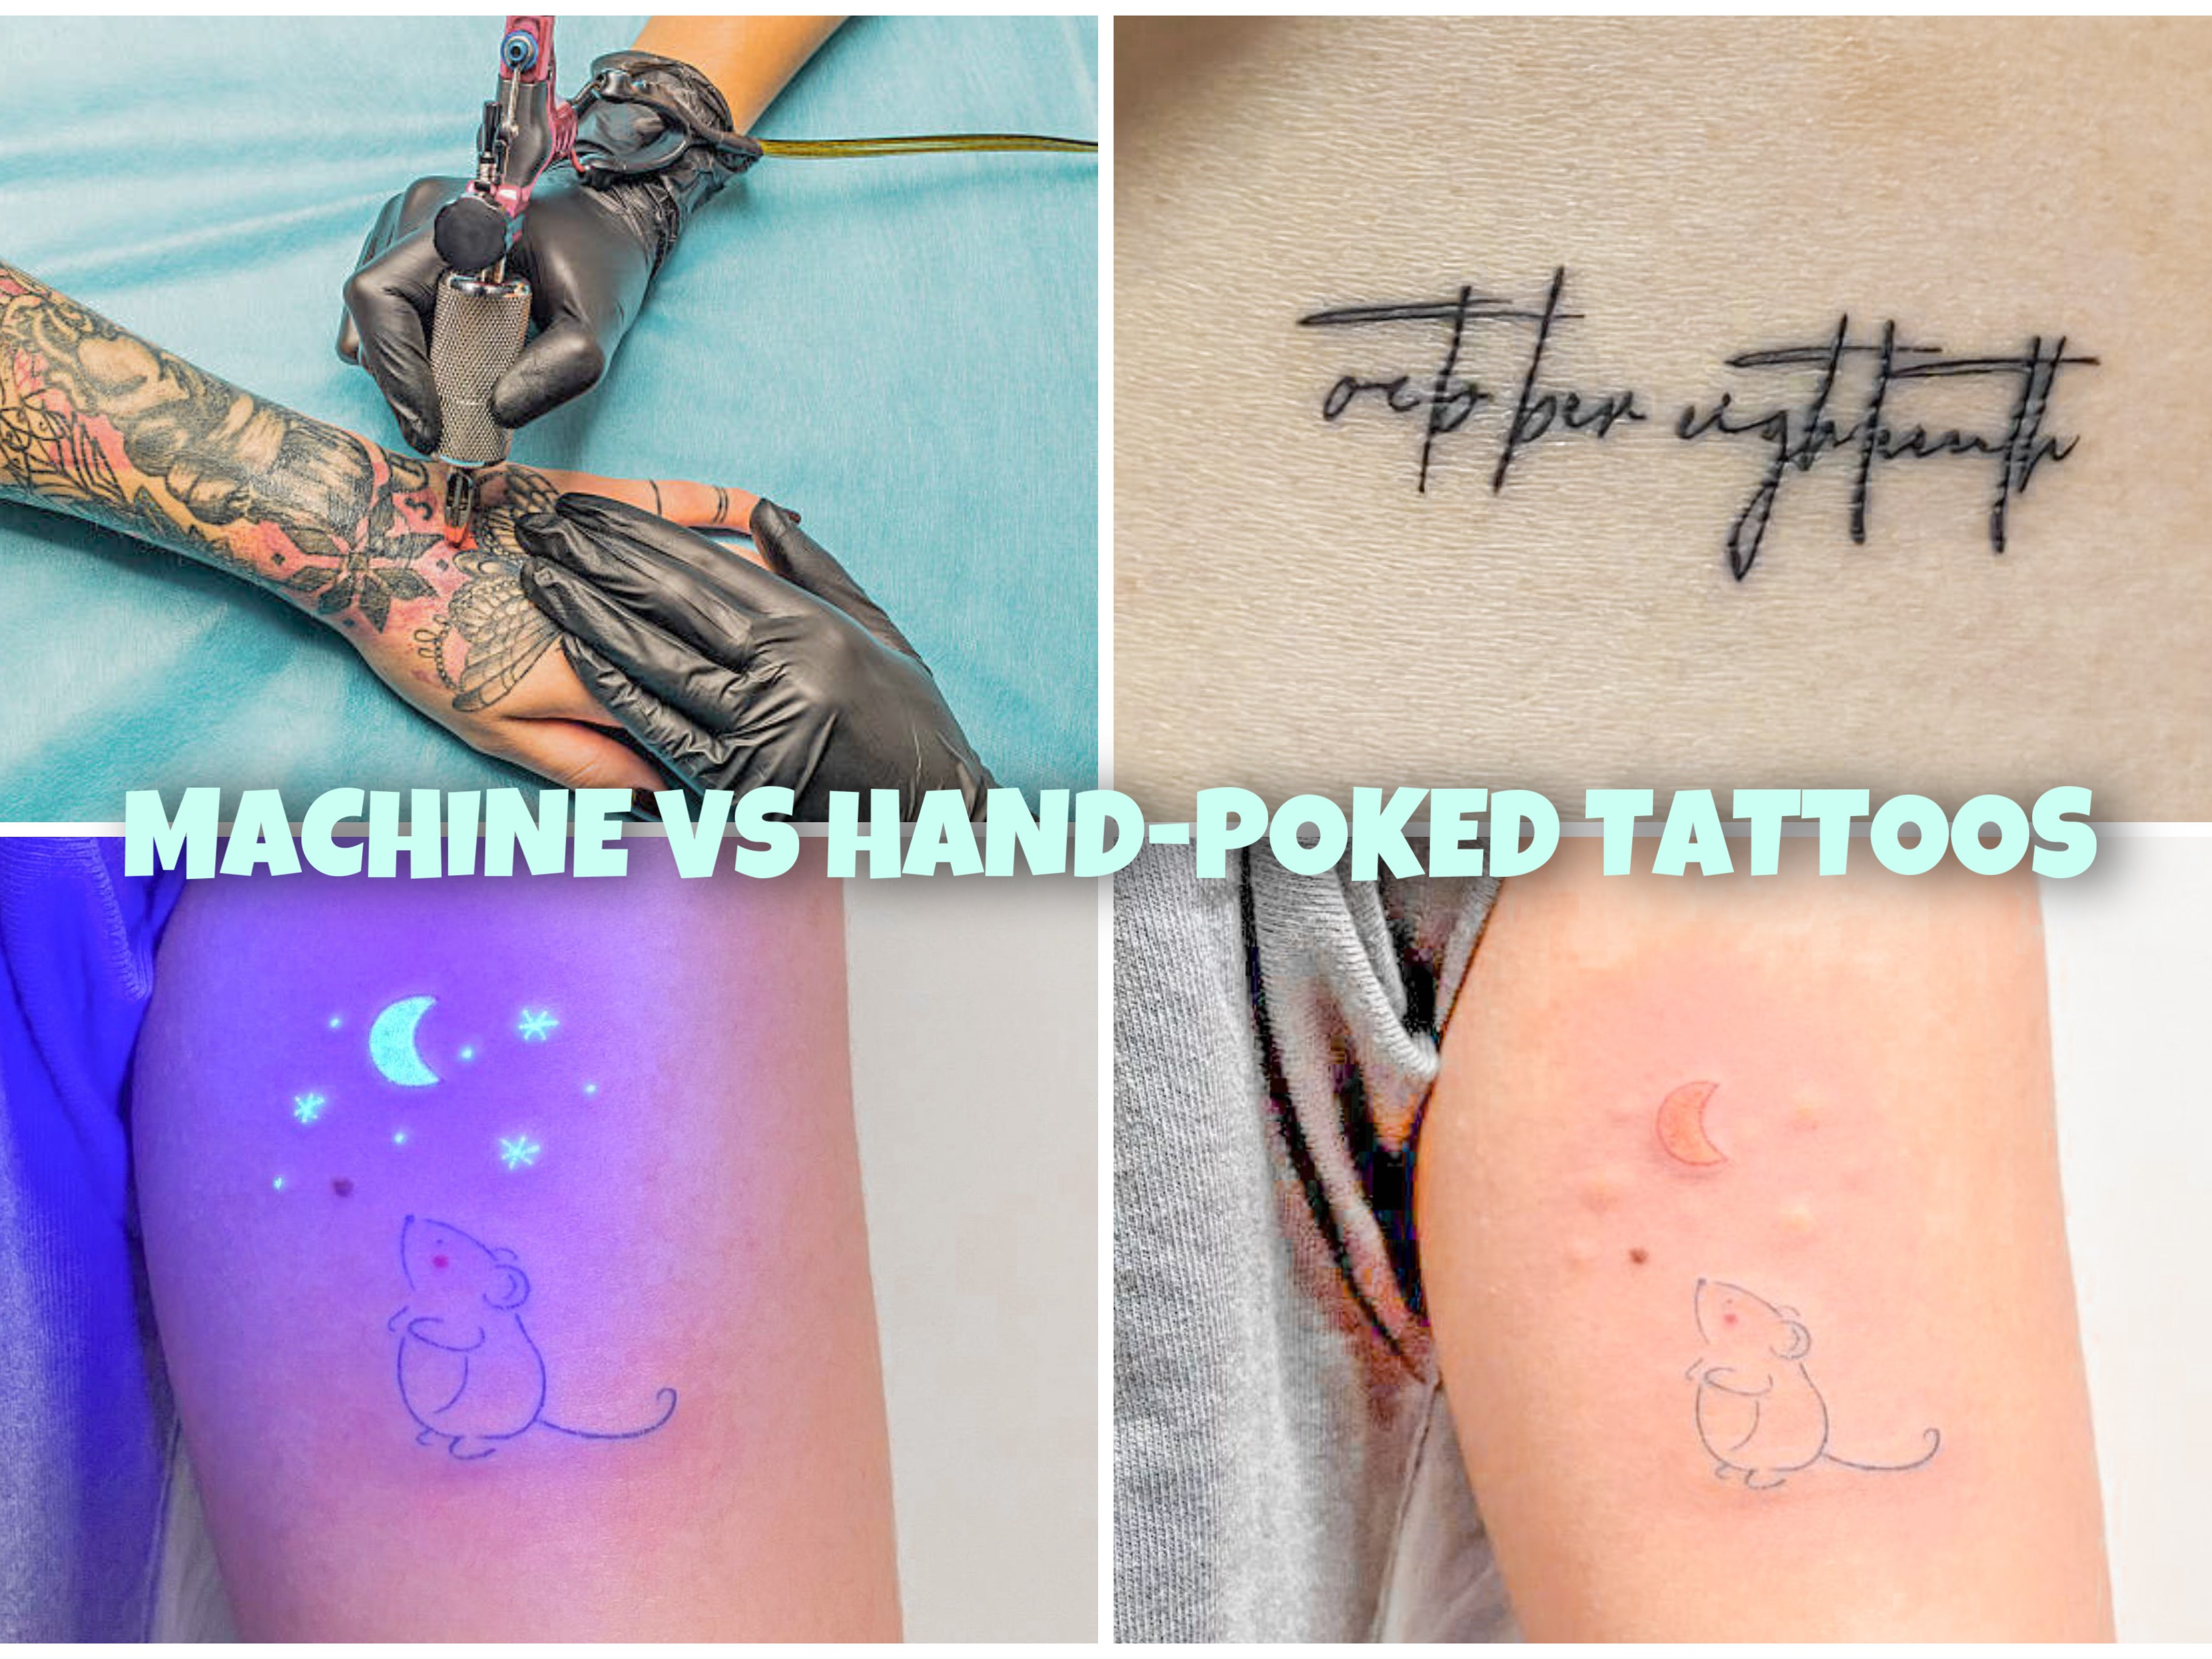 Tattoo Artist Specializes in Tattoos That Look Like Stickers